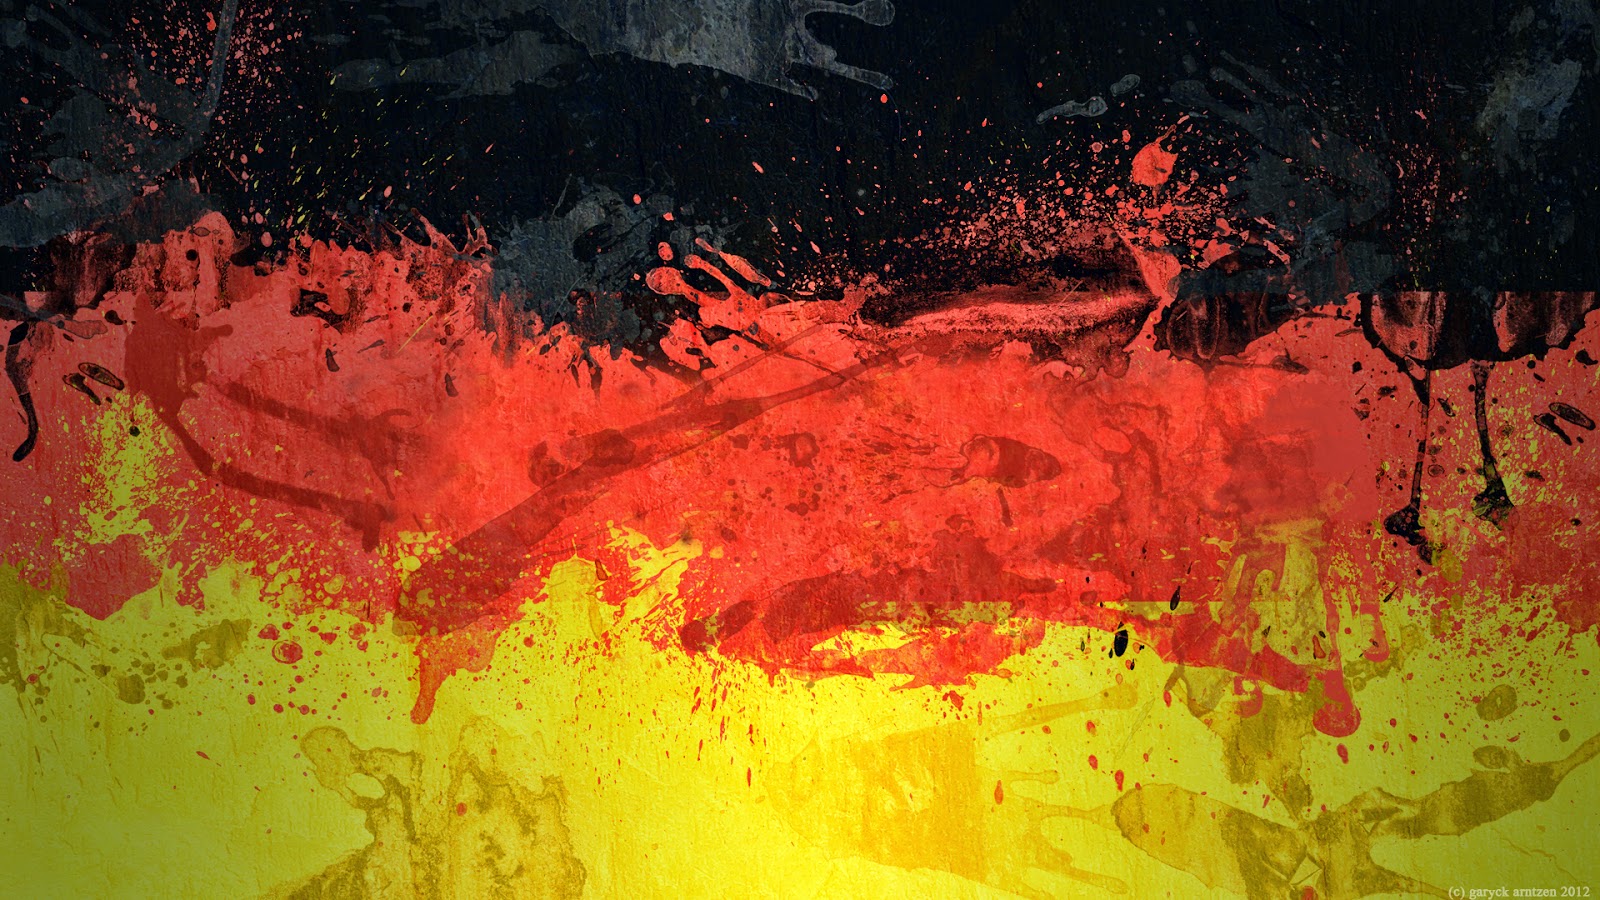 fifa_world_cup_2014-wallpaperquoc-ky-duc-german